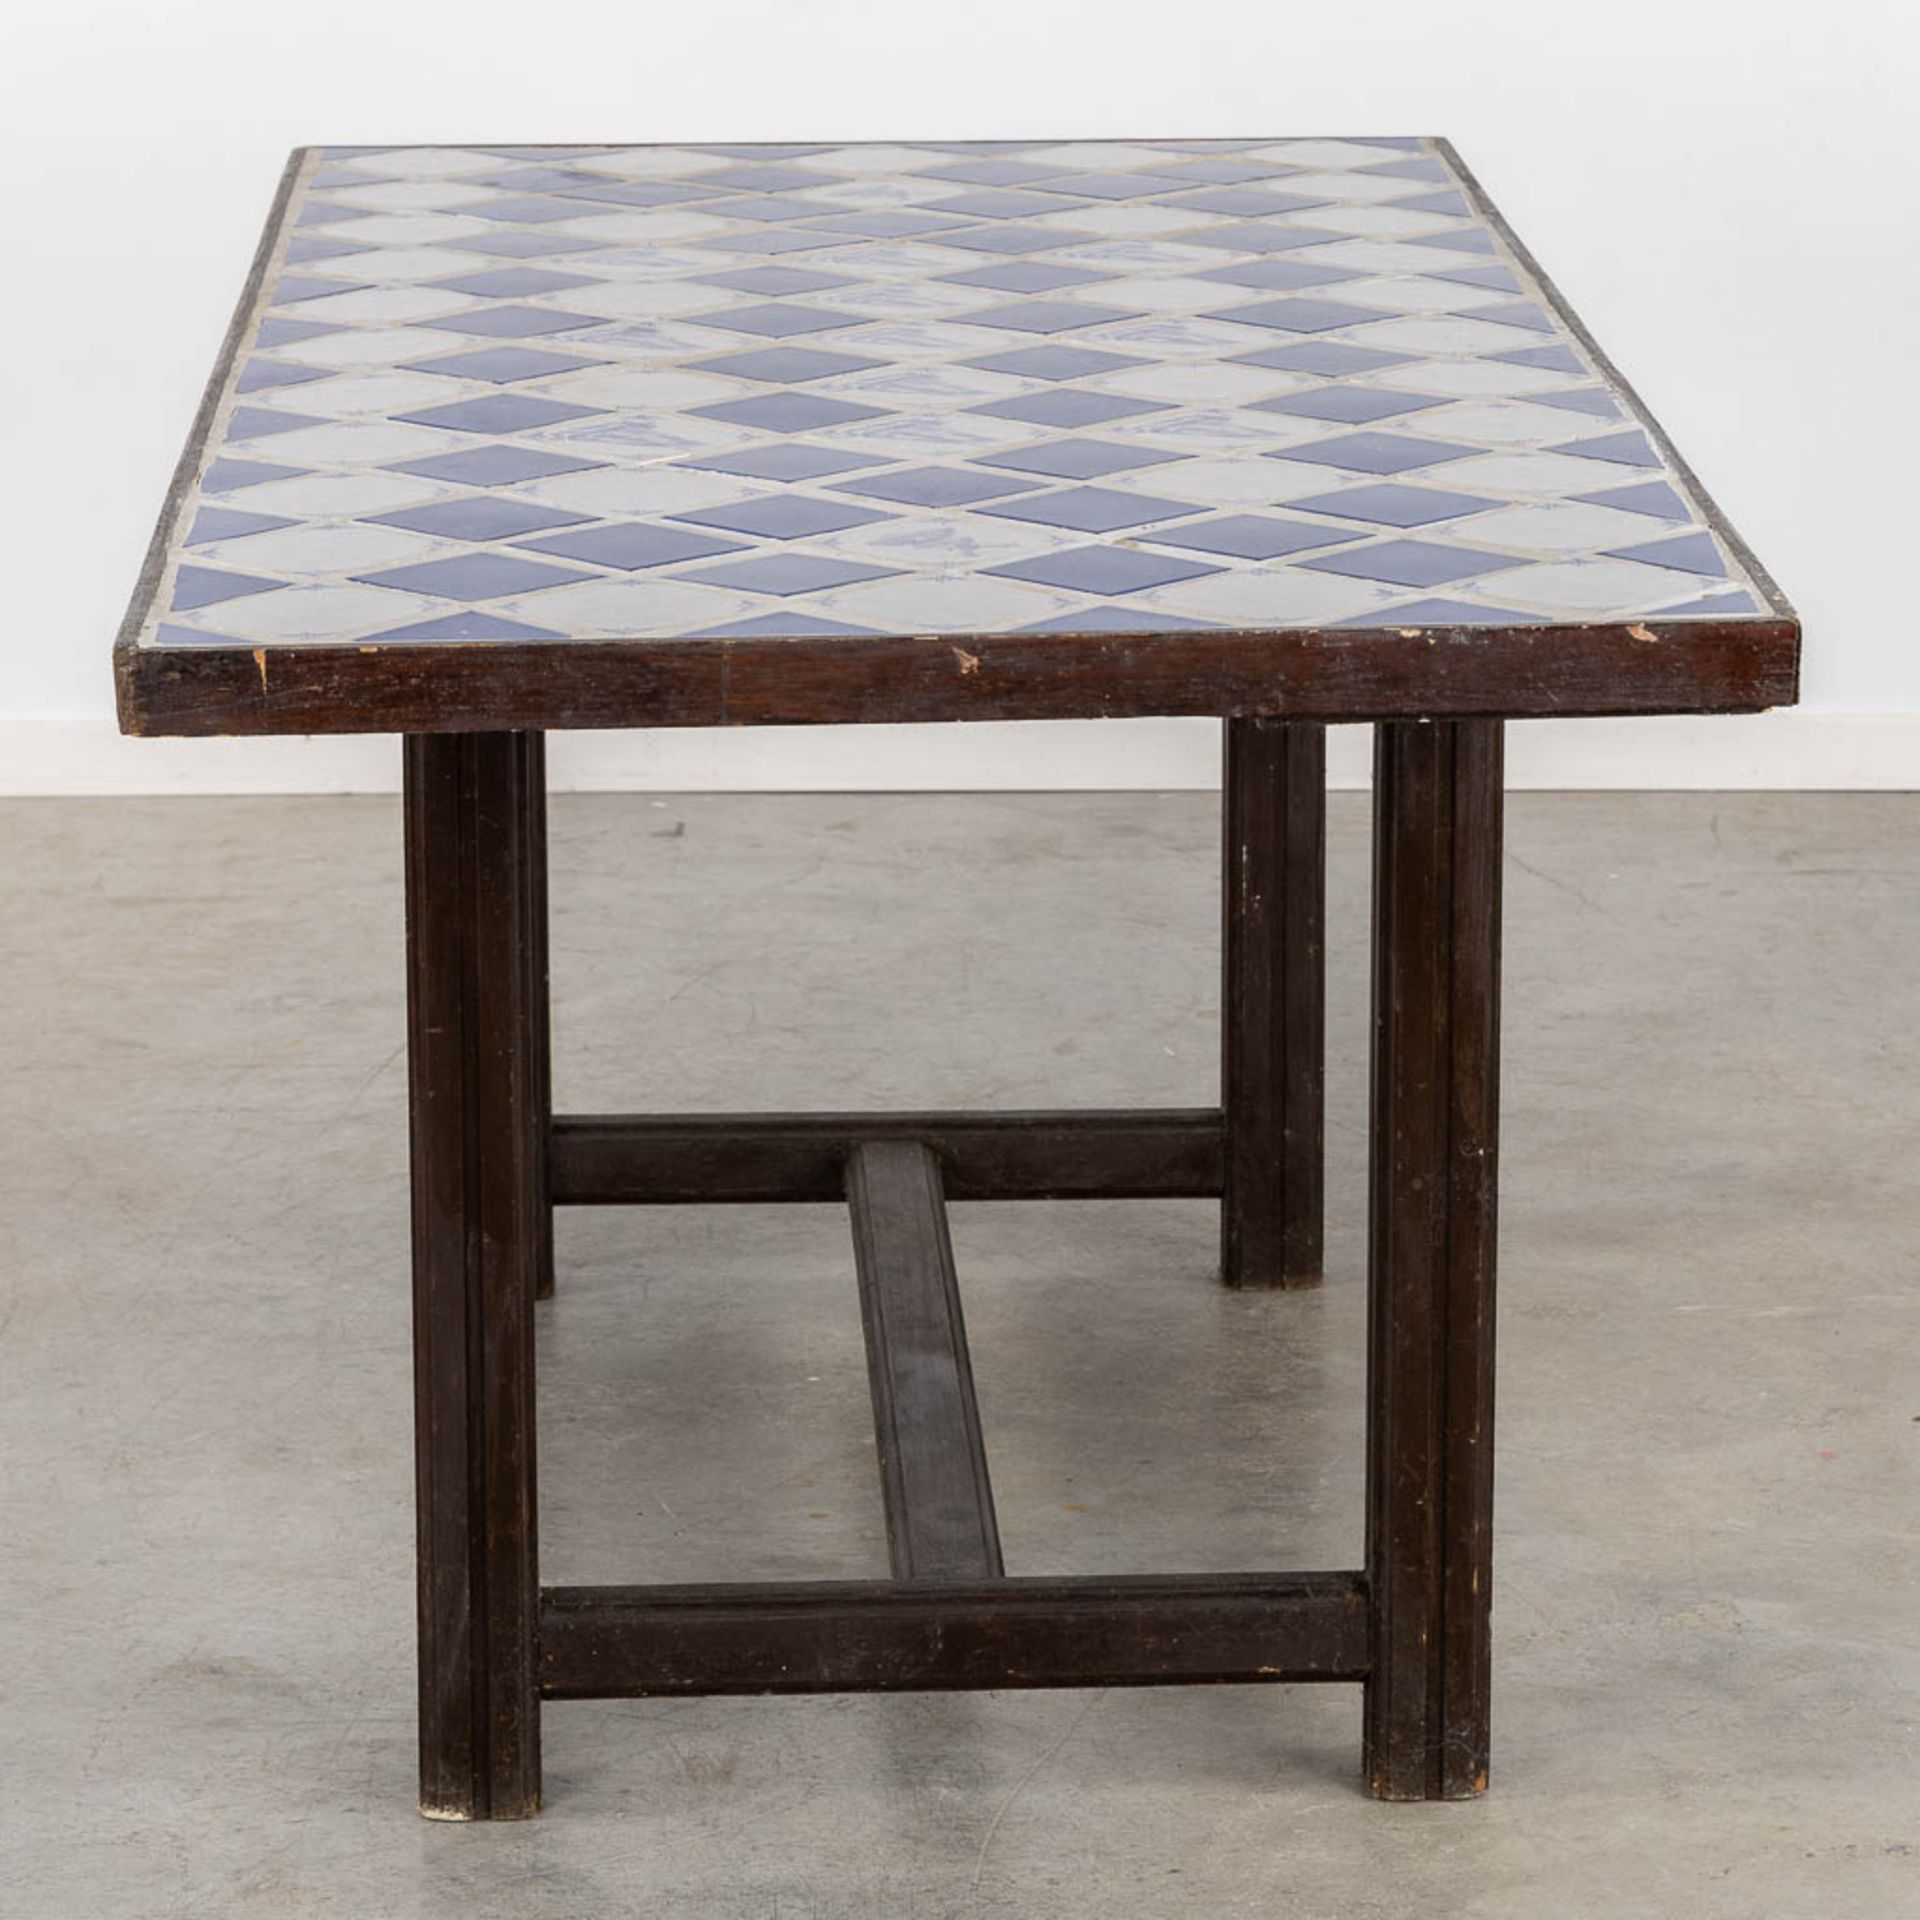 A Spanish table, finished with white and blue tiles. (L:85 x W:184 x H:76 cm) - Bild 4 aus 11